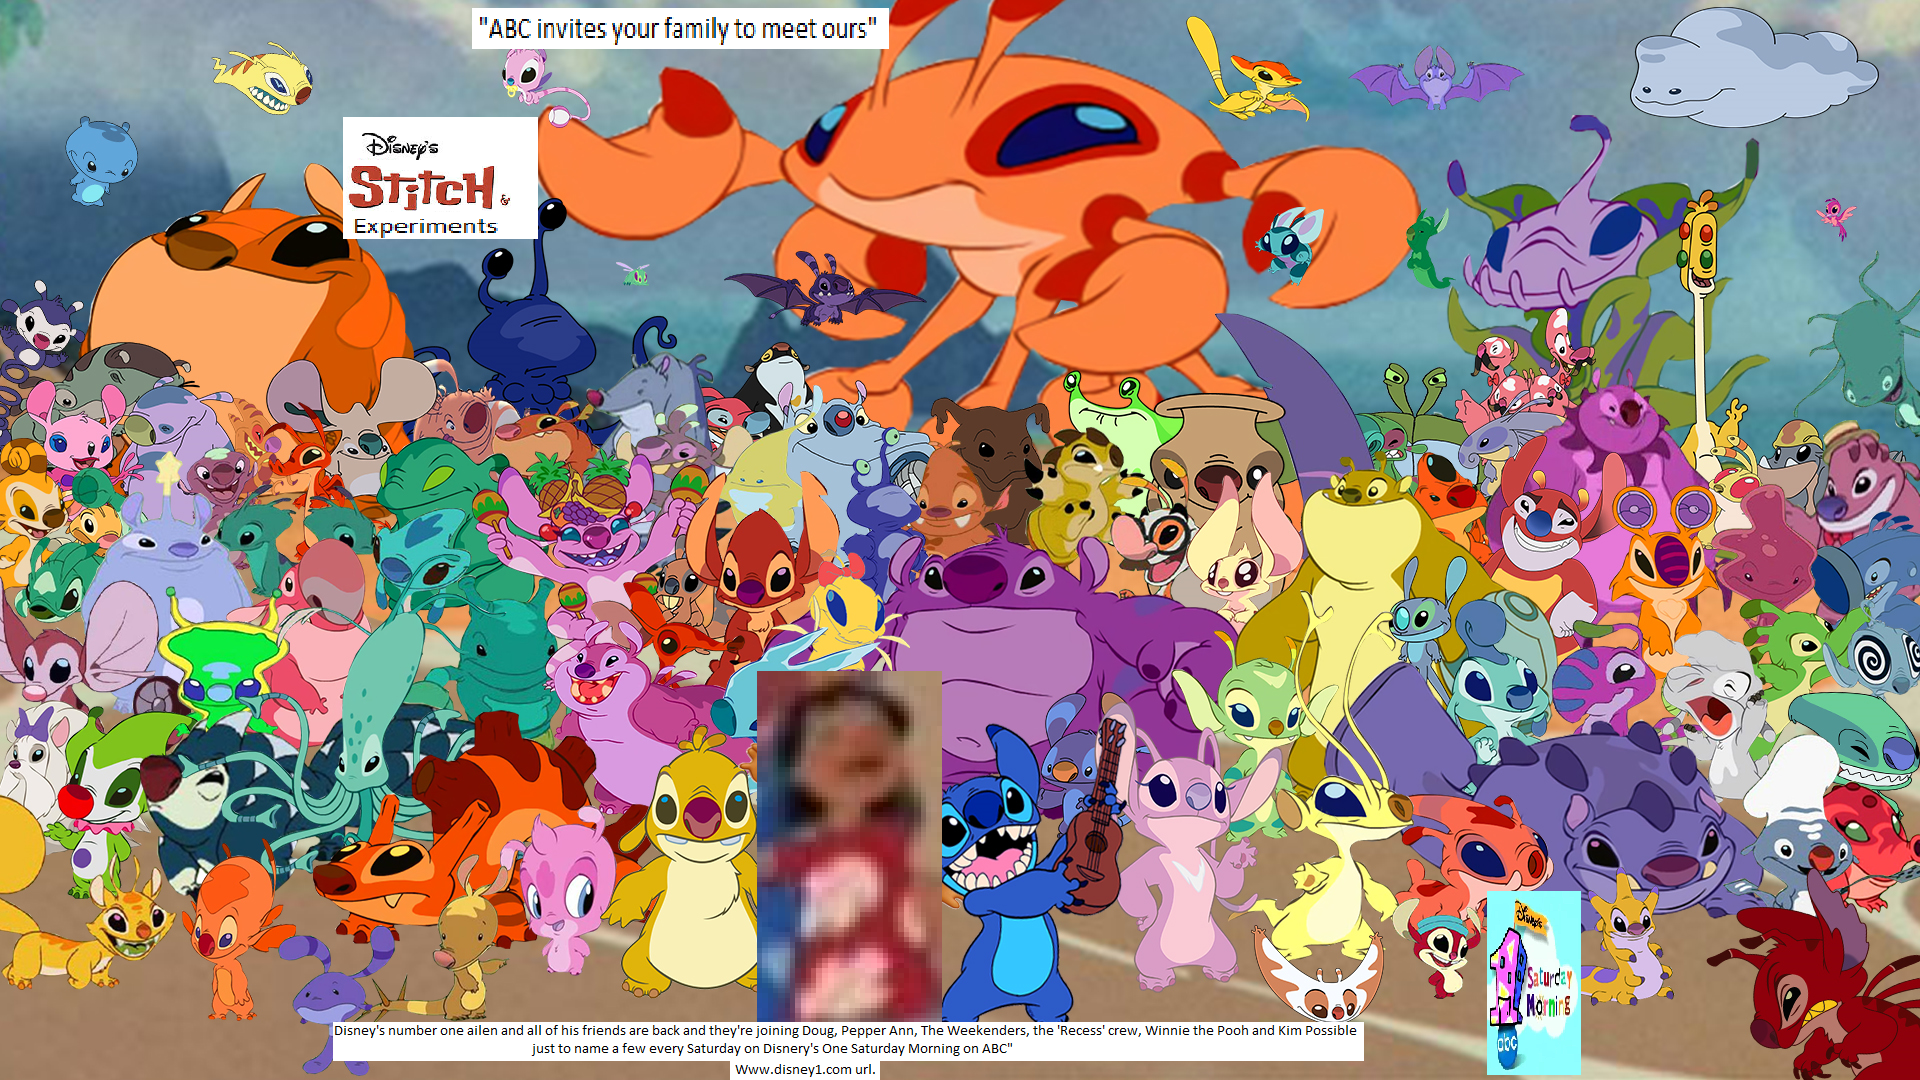 Stitch and Experiments (TV Series) | Scratchpad | Fandom